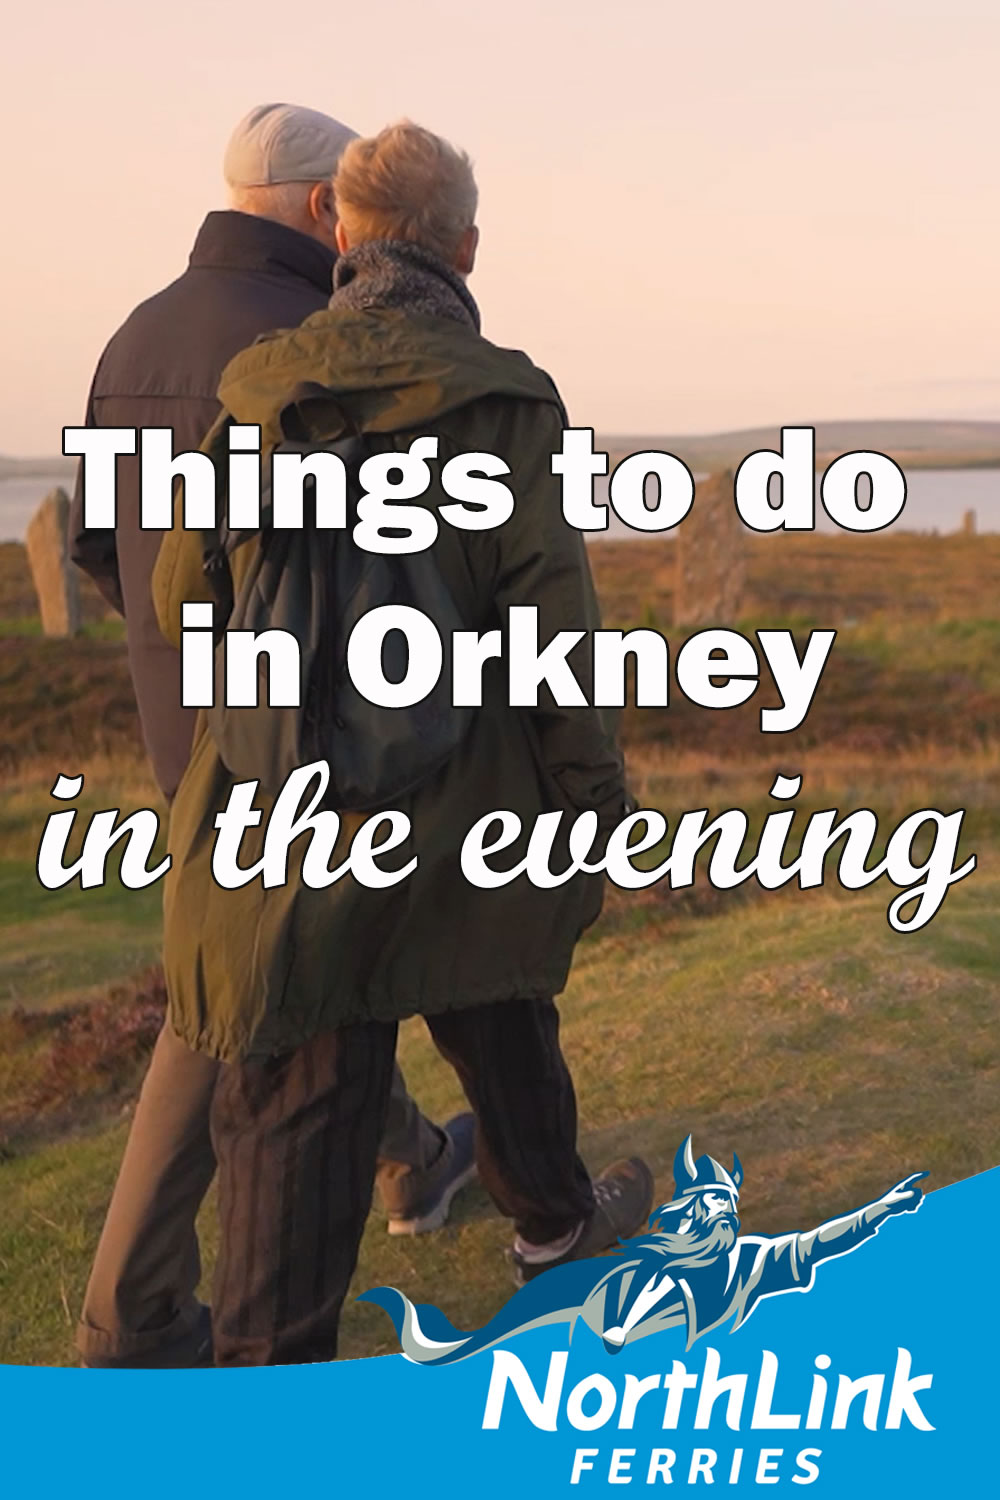 Things to do in Orkney in the evening